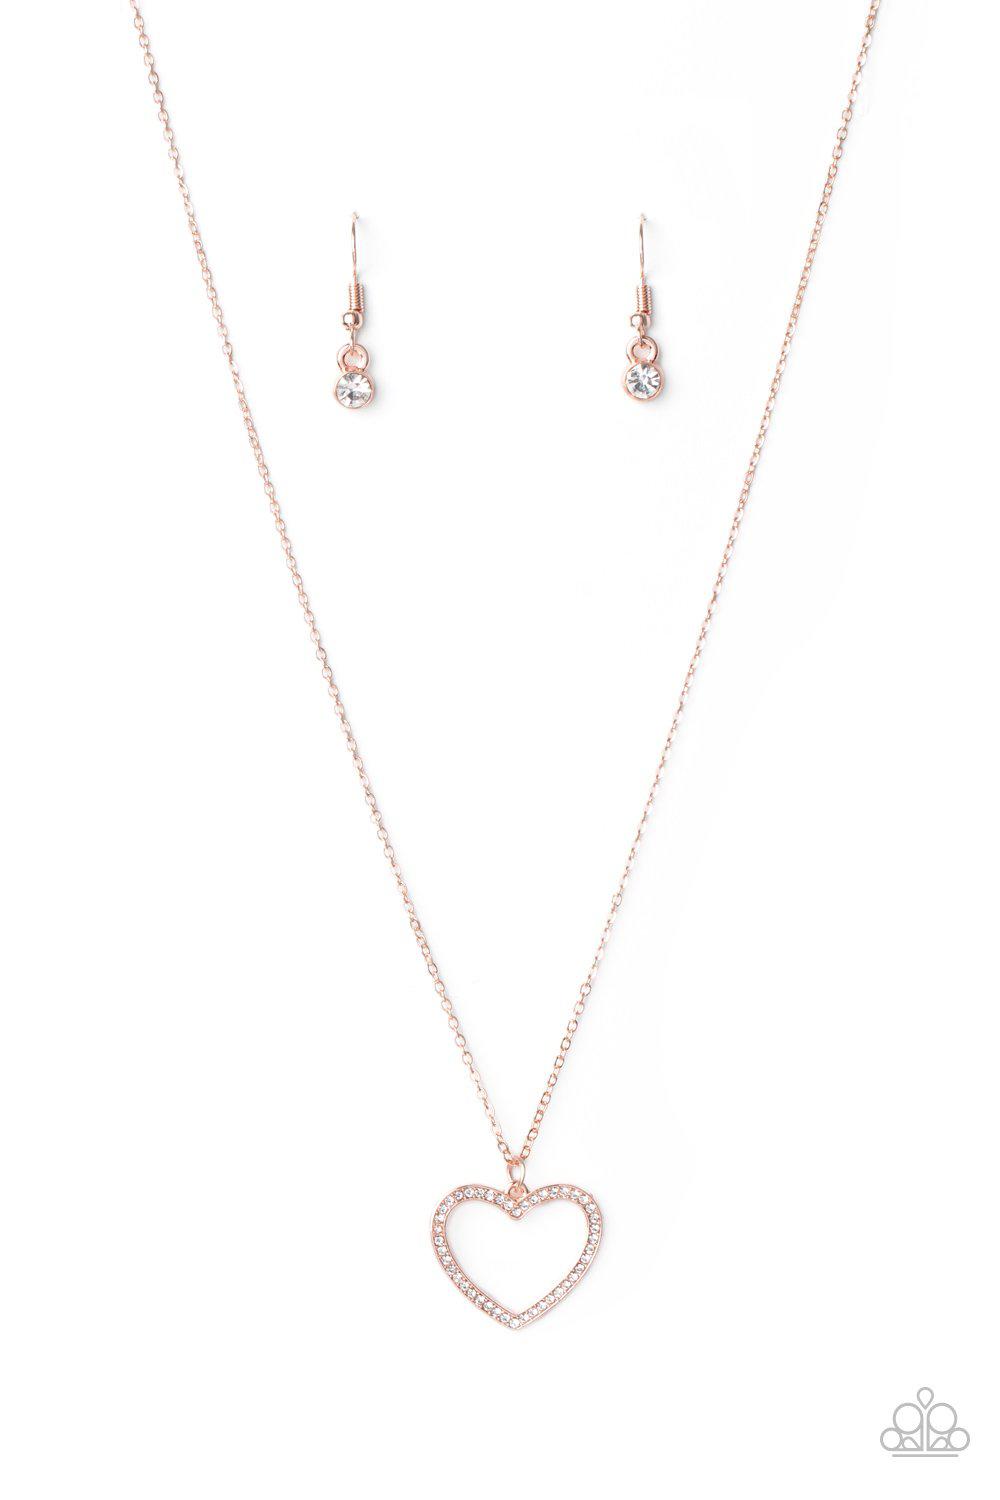 GLOW by Heart Rose Gold and White Rhinestone Heart Necklace - Paparazzi Accessories - lightbox -CarasShop.com - $5 Jewelry by Cara Jewels